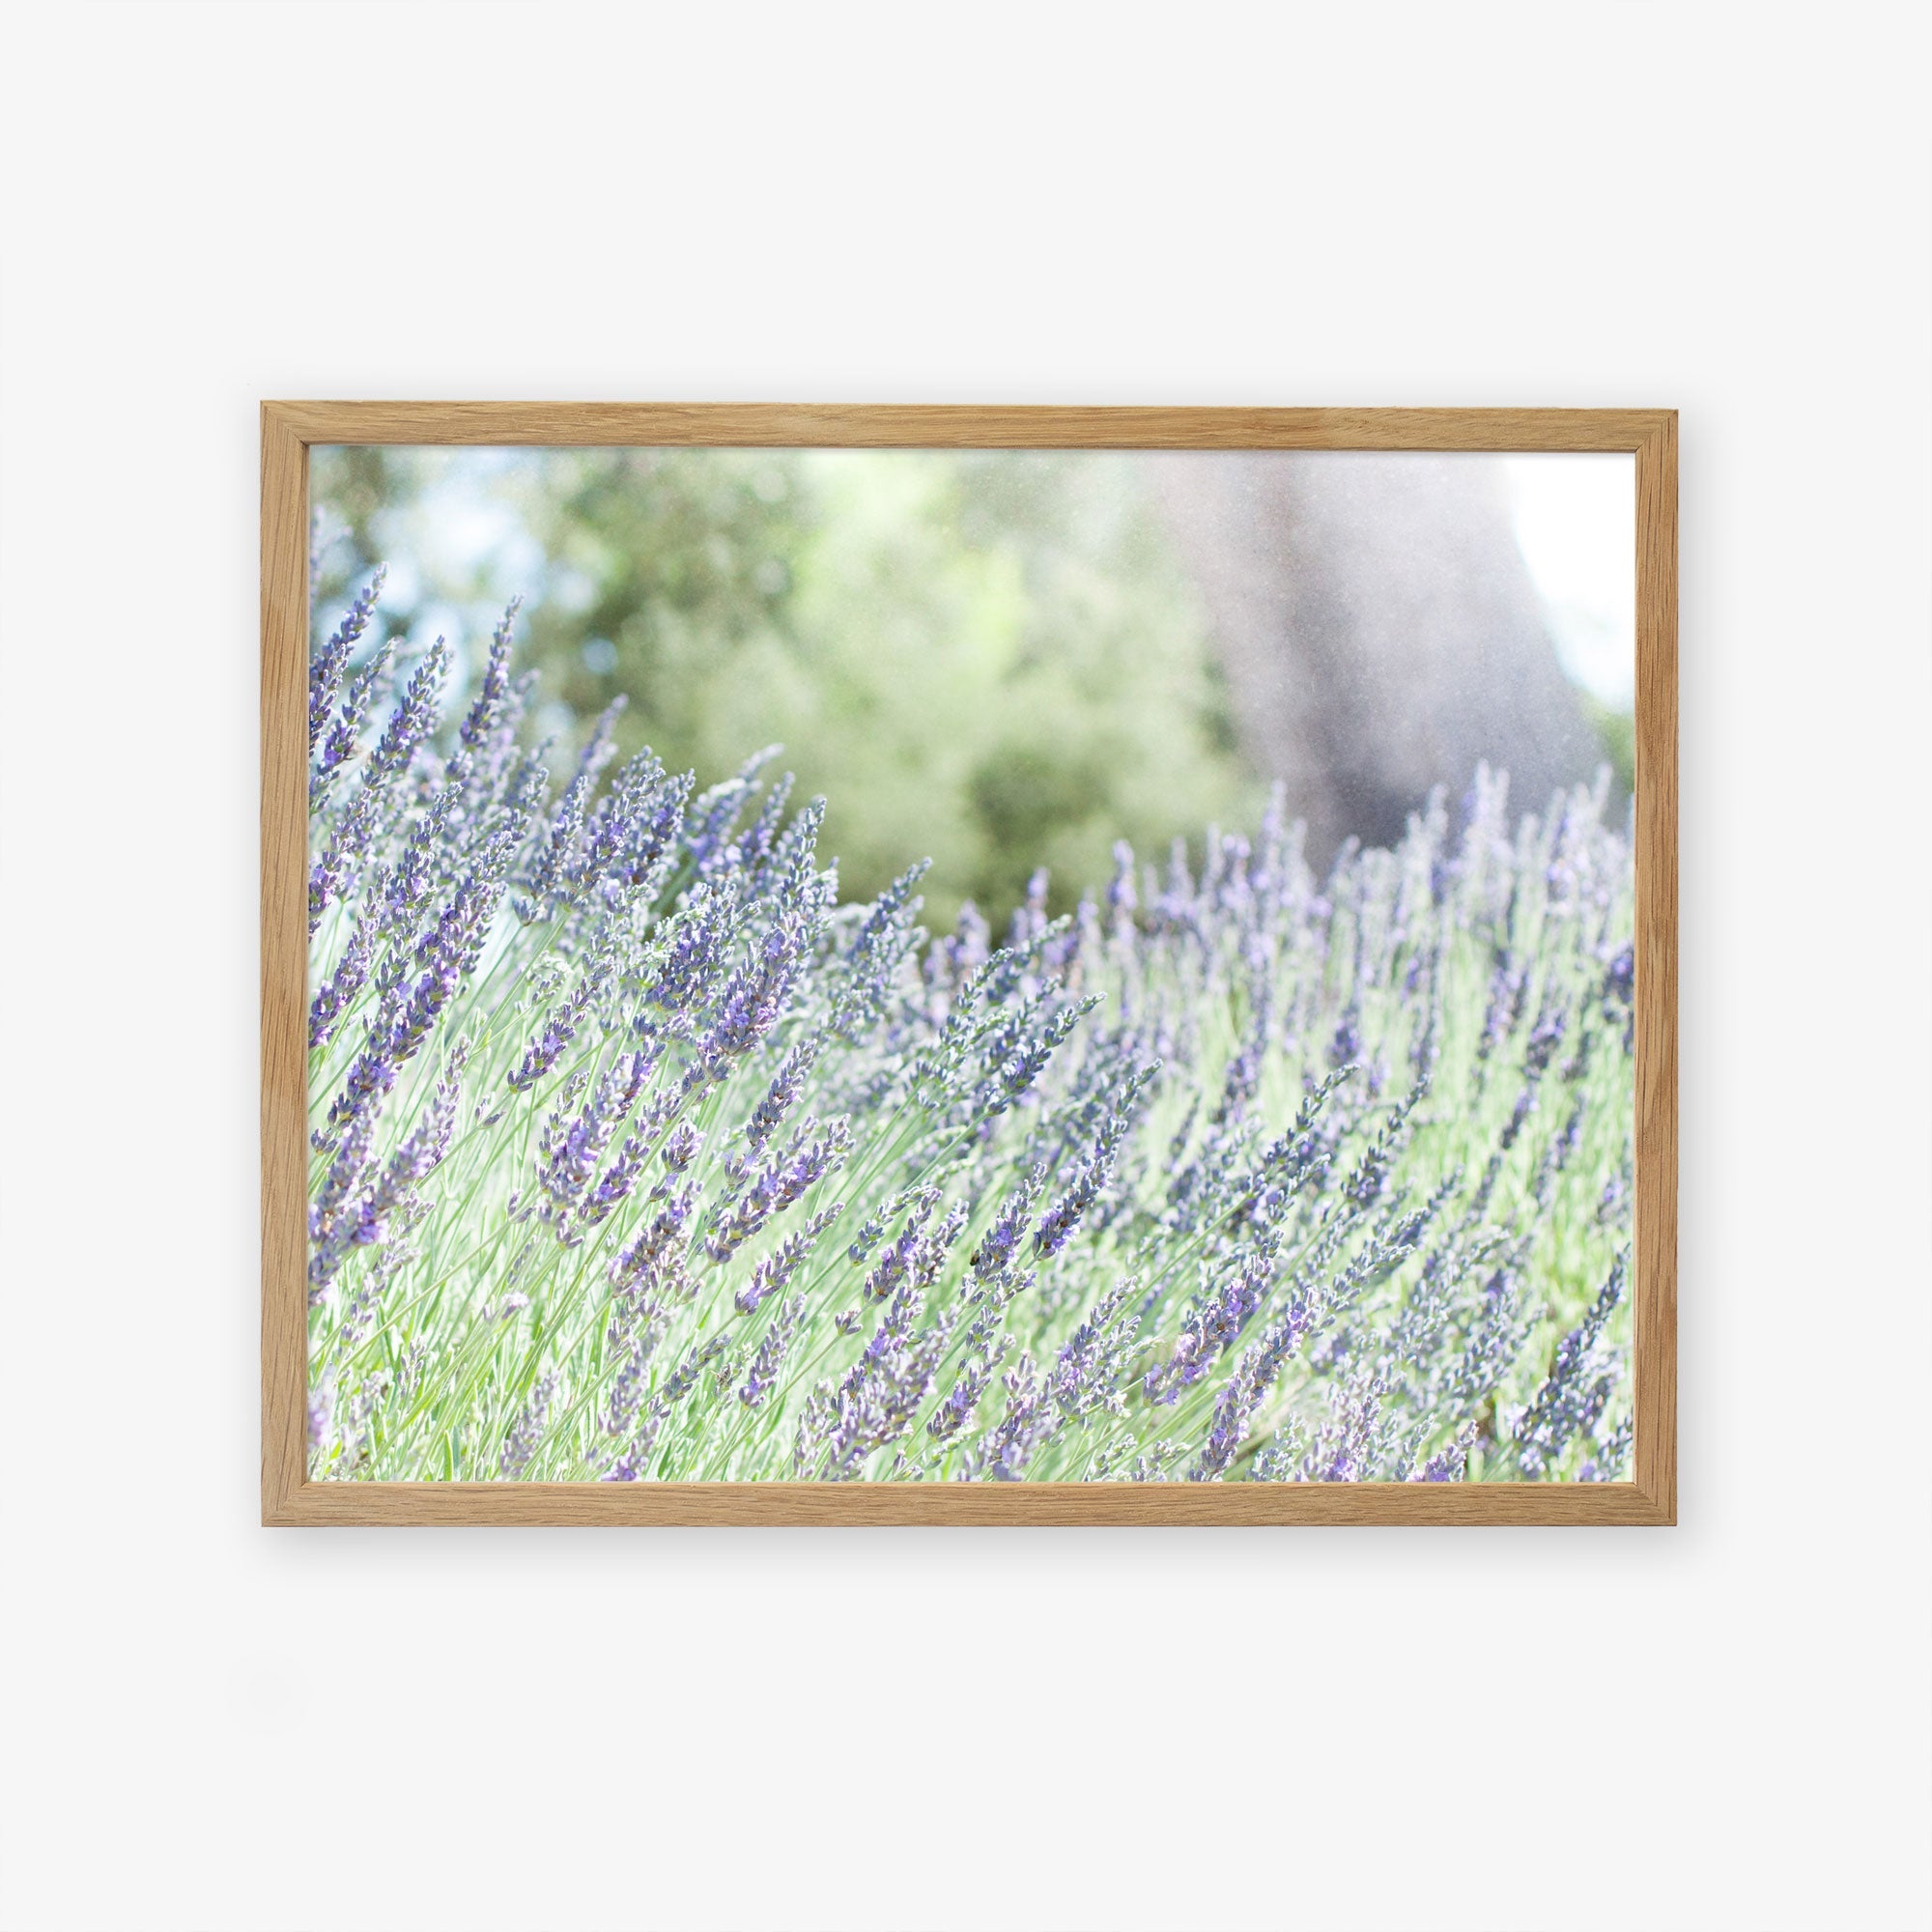 A framed photograph of a lavender field with tall, purple lavender flowers in bloom. The background is blurred, showcasing a tree trunk and greenery, creating a serene and natural scene. Printed on archival photographic paper, the frame has a light wood finish. This piece is known as &quot;Rustic Floral Print, &#39;Fields of Lavender&#39;&quot; by Offley Green.